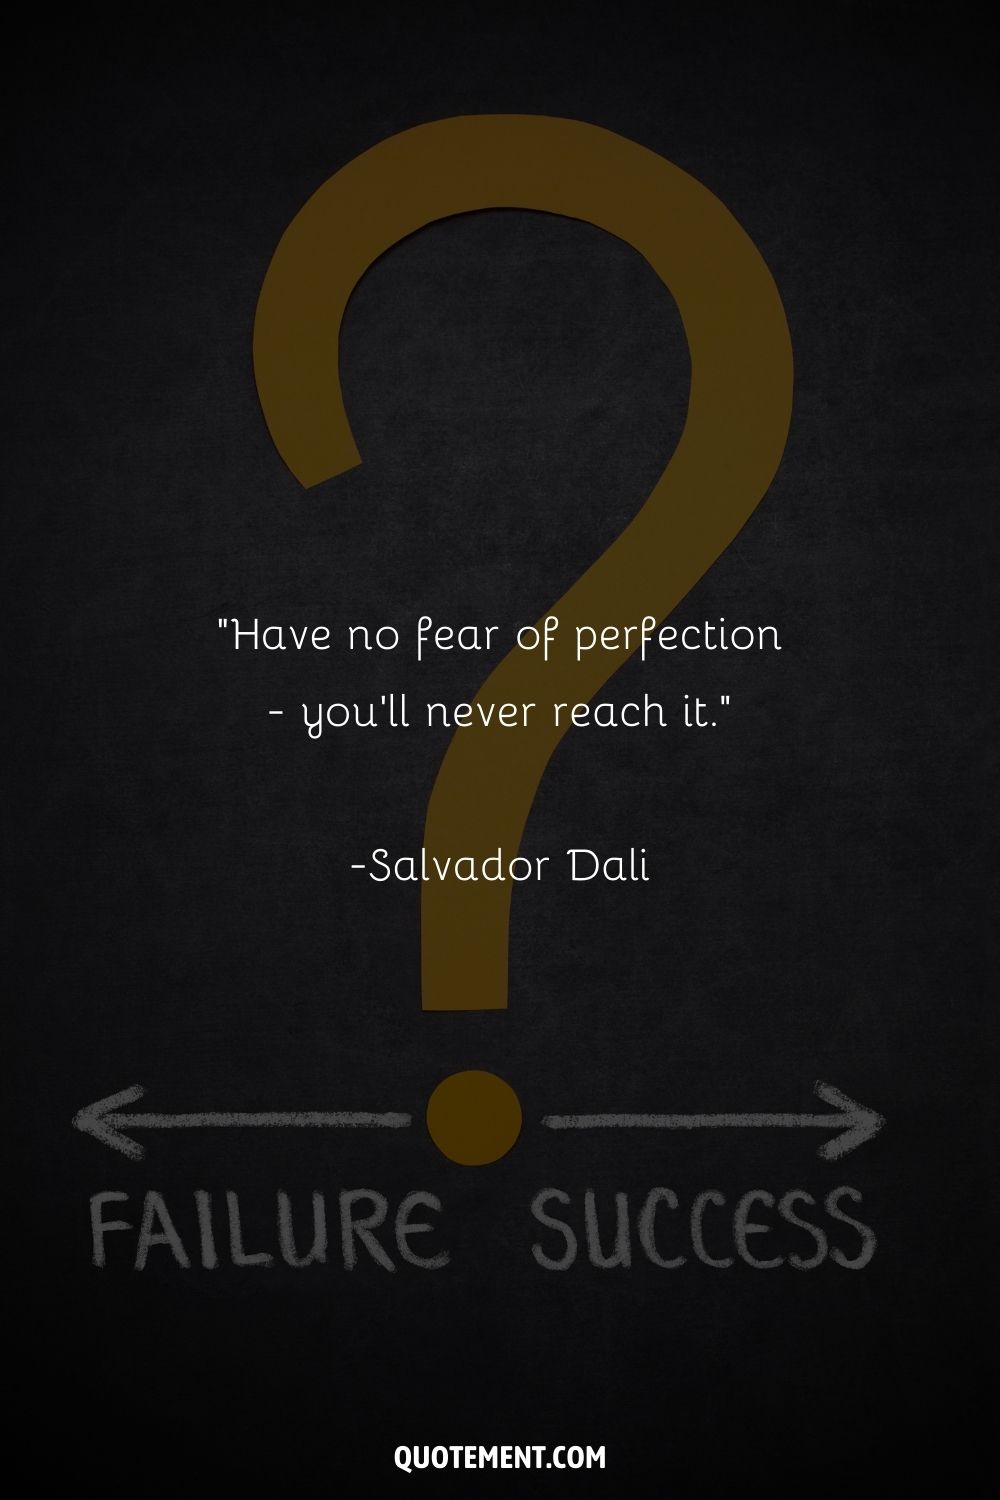 “Have no fear of perfection - you'll never reach it.” ― Salvador Dali